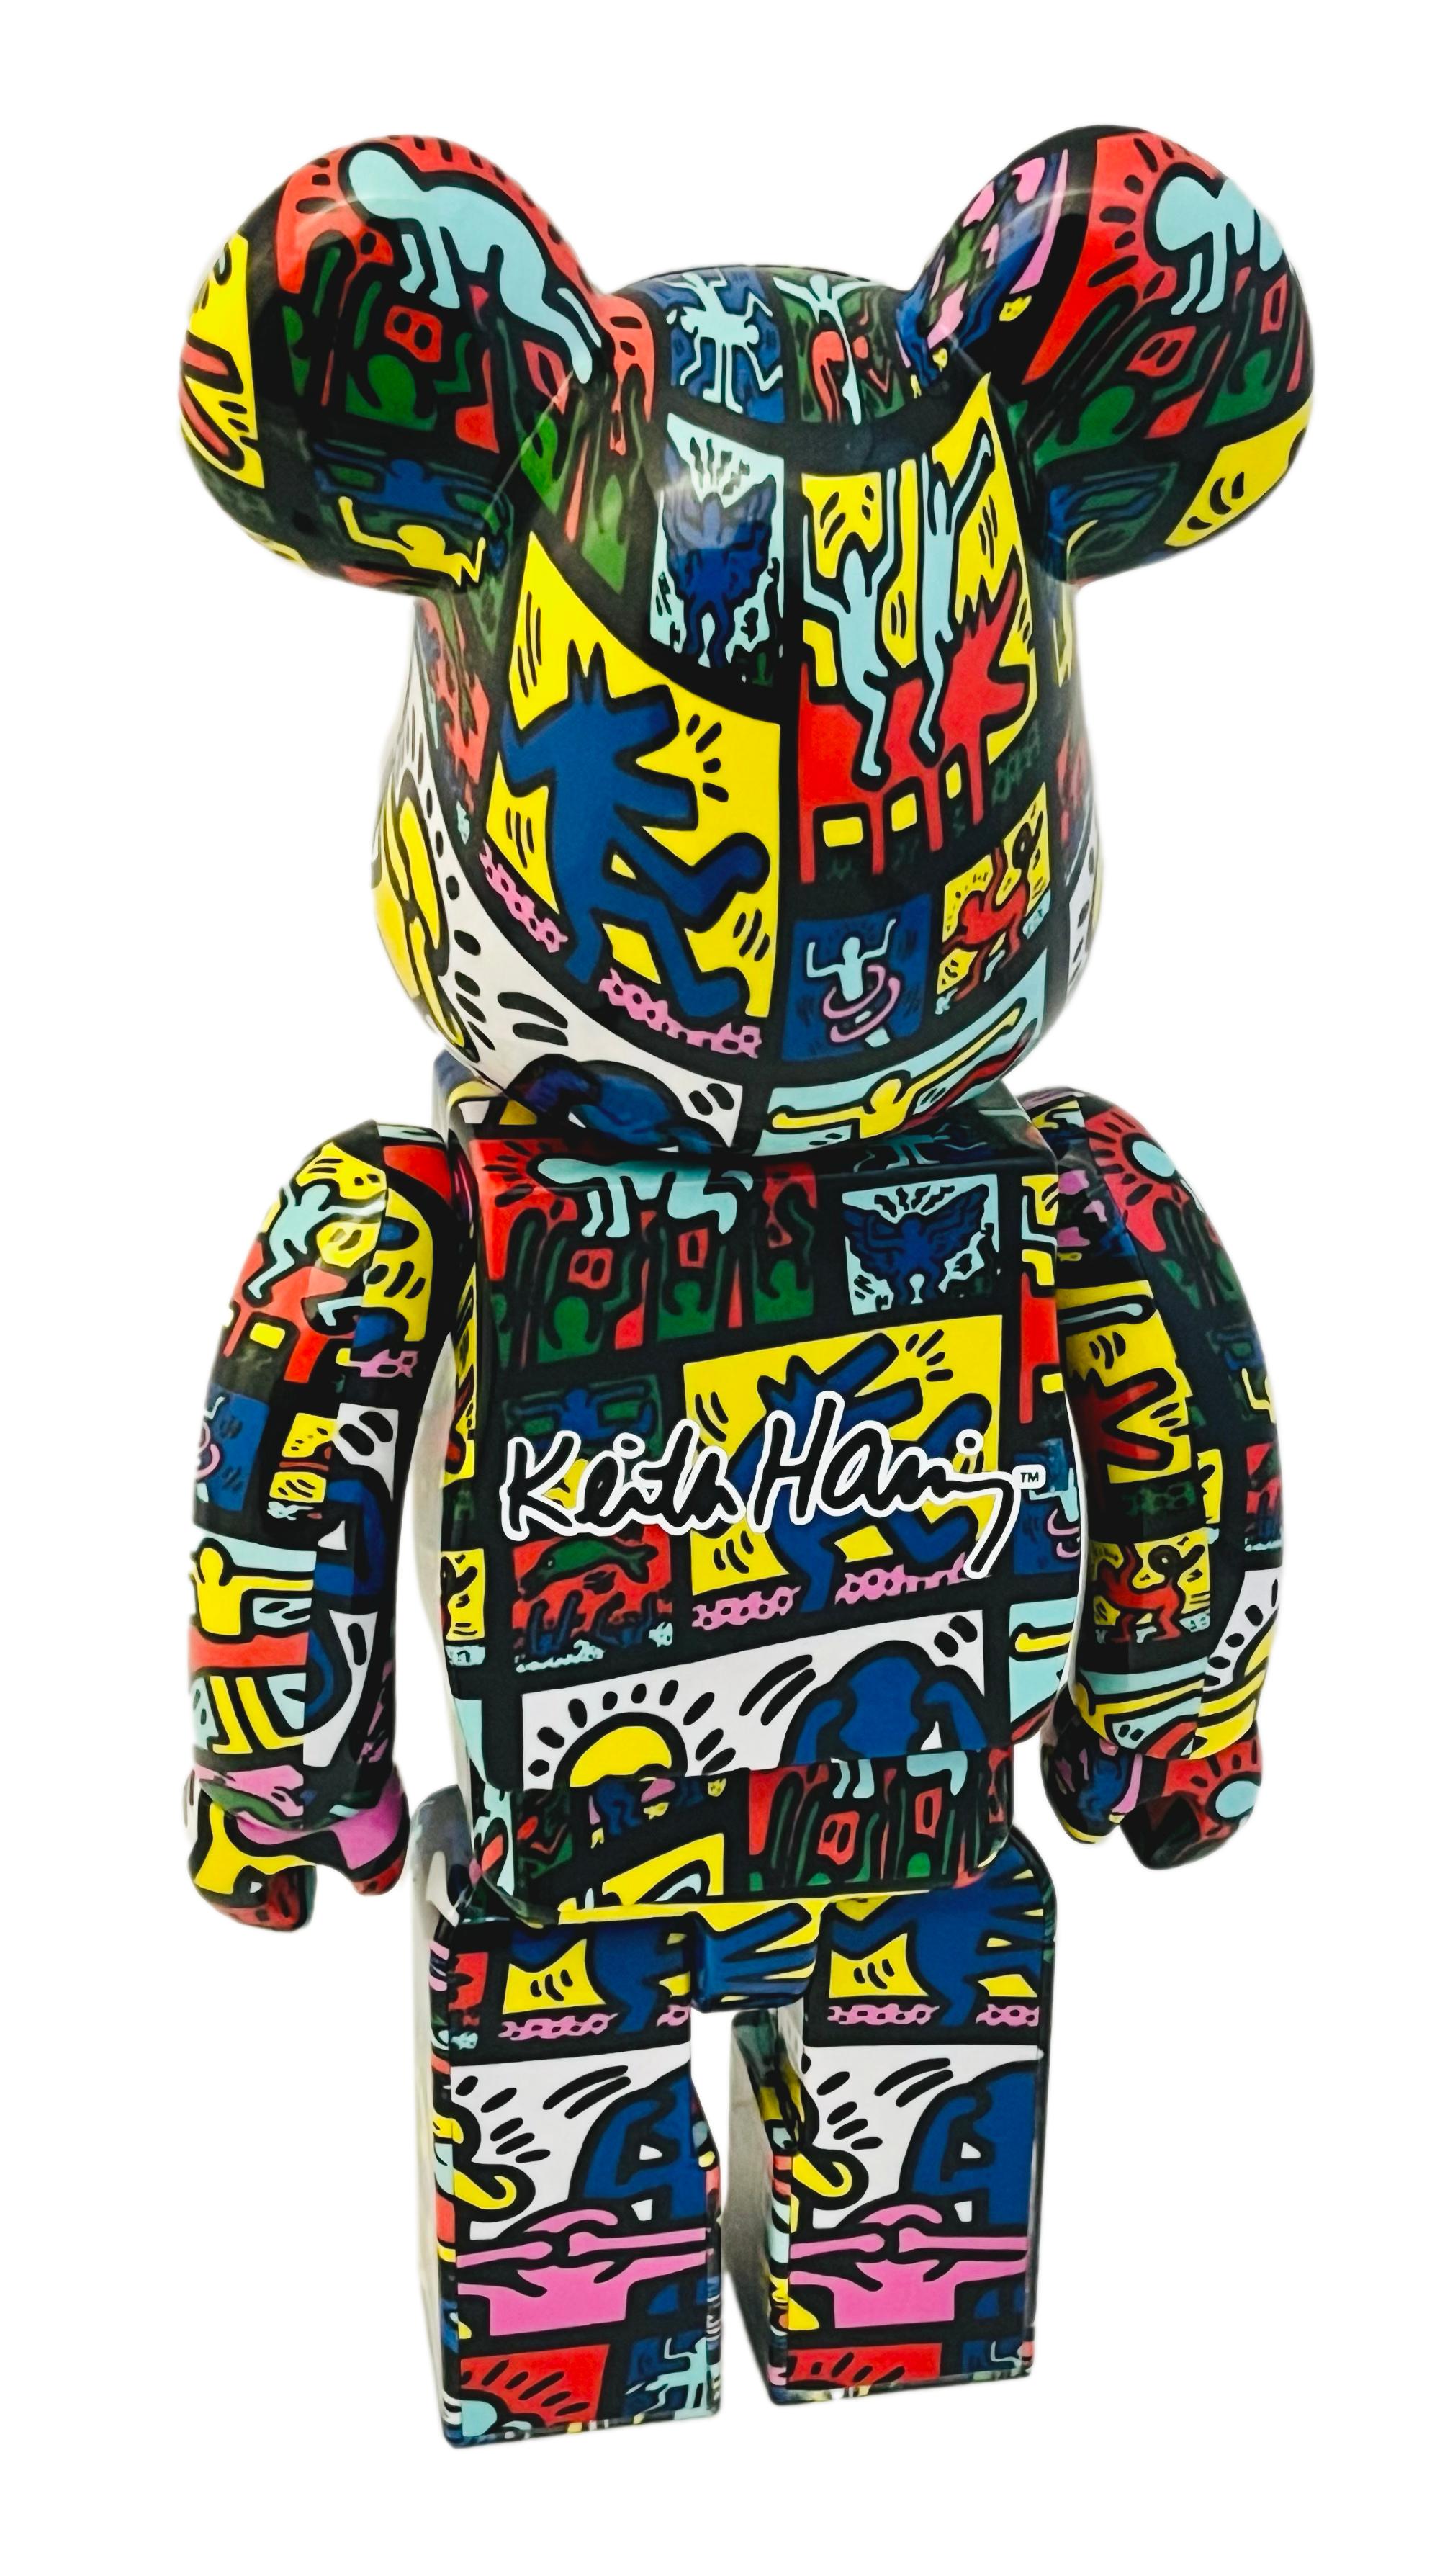 Keith Haring Bearbrick 400%  (Keith Haring BE@RBRICK)  For Sale 3